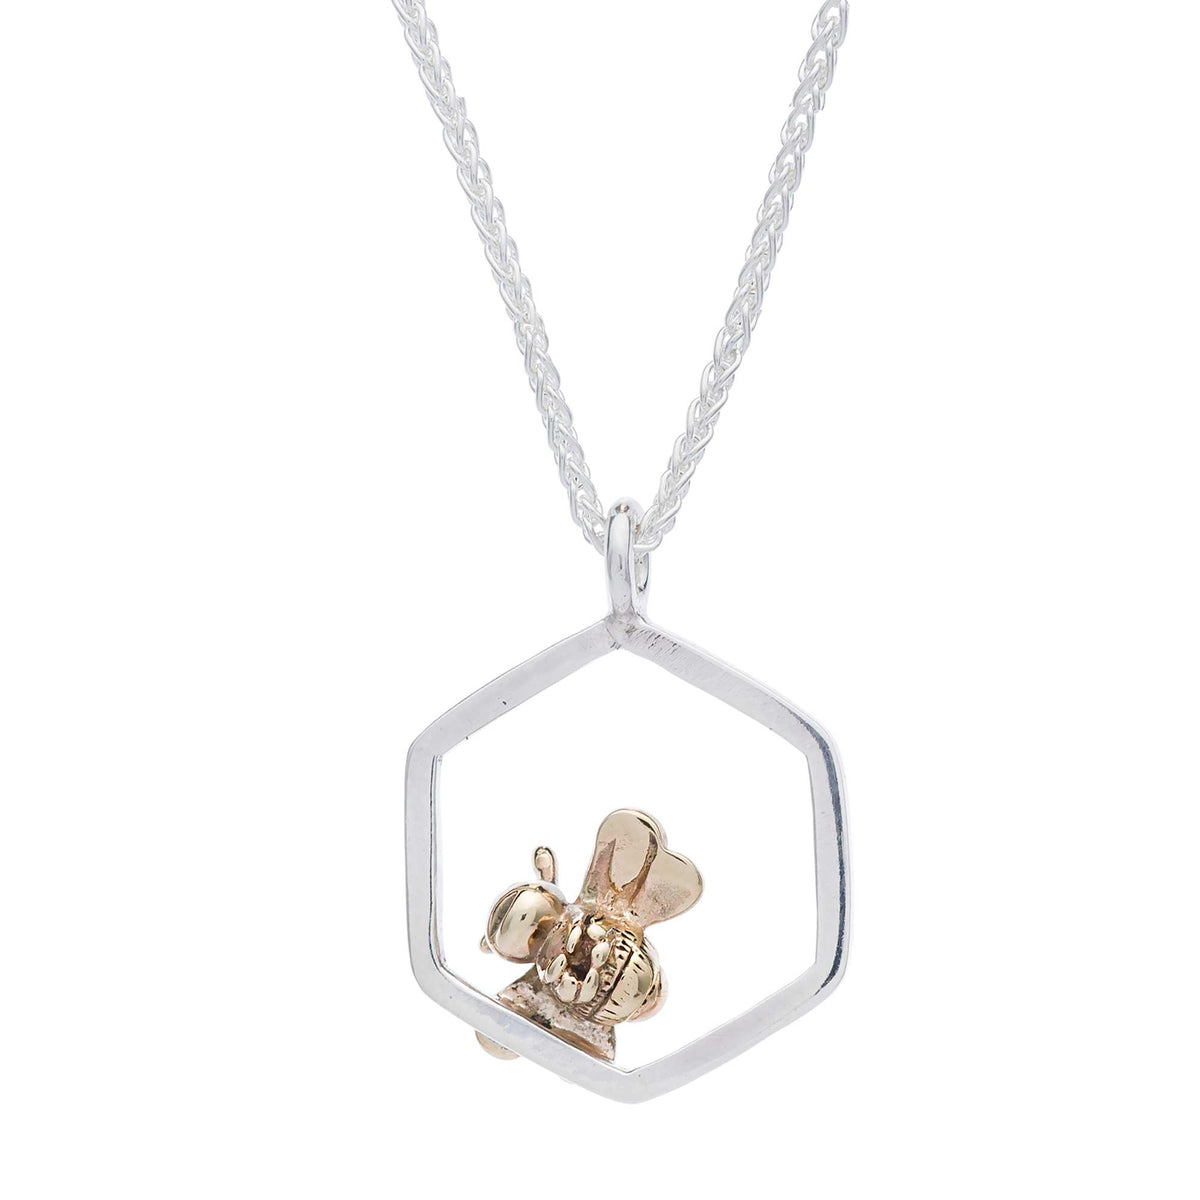 Tiny rested honeybee silver and gold necklace scarlett jewellery